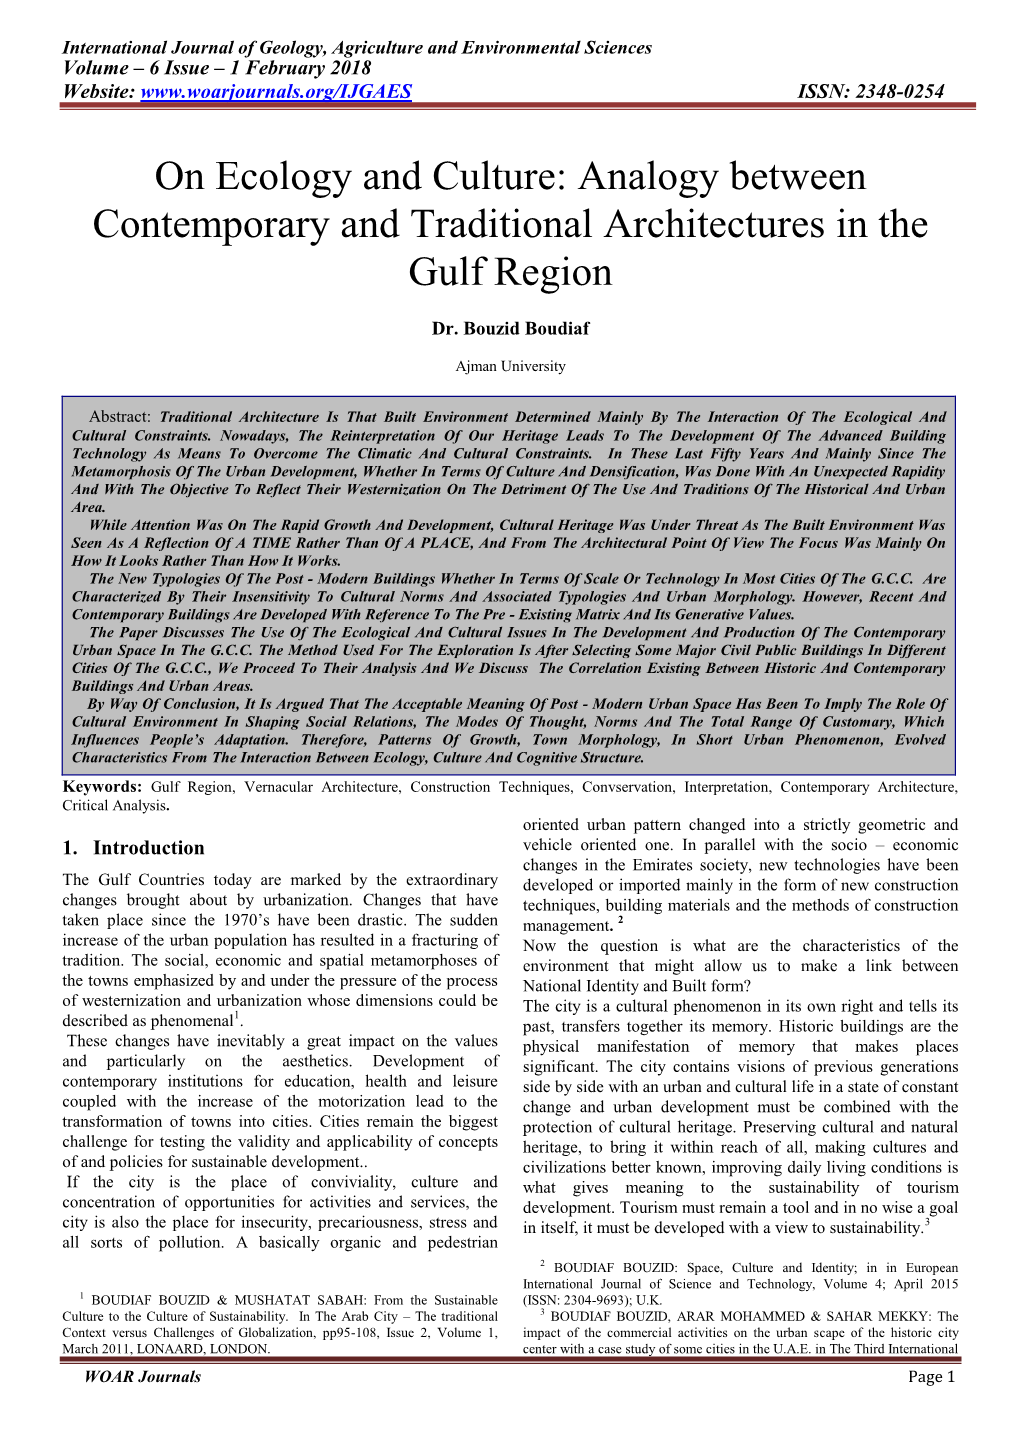 On Ecology and Culture: Analogy Between Contemporary and Traditional Architectures in the Gulf Region